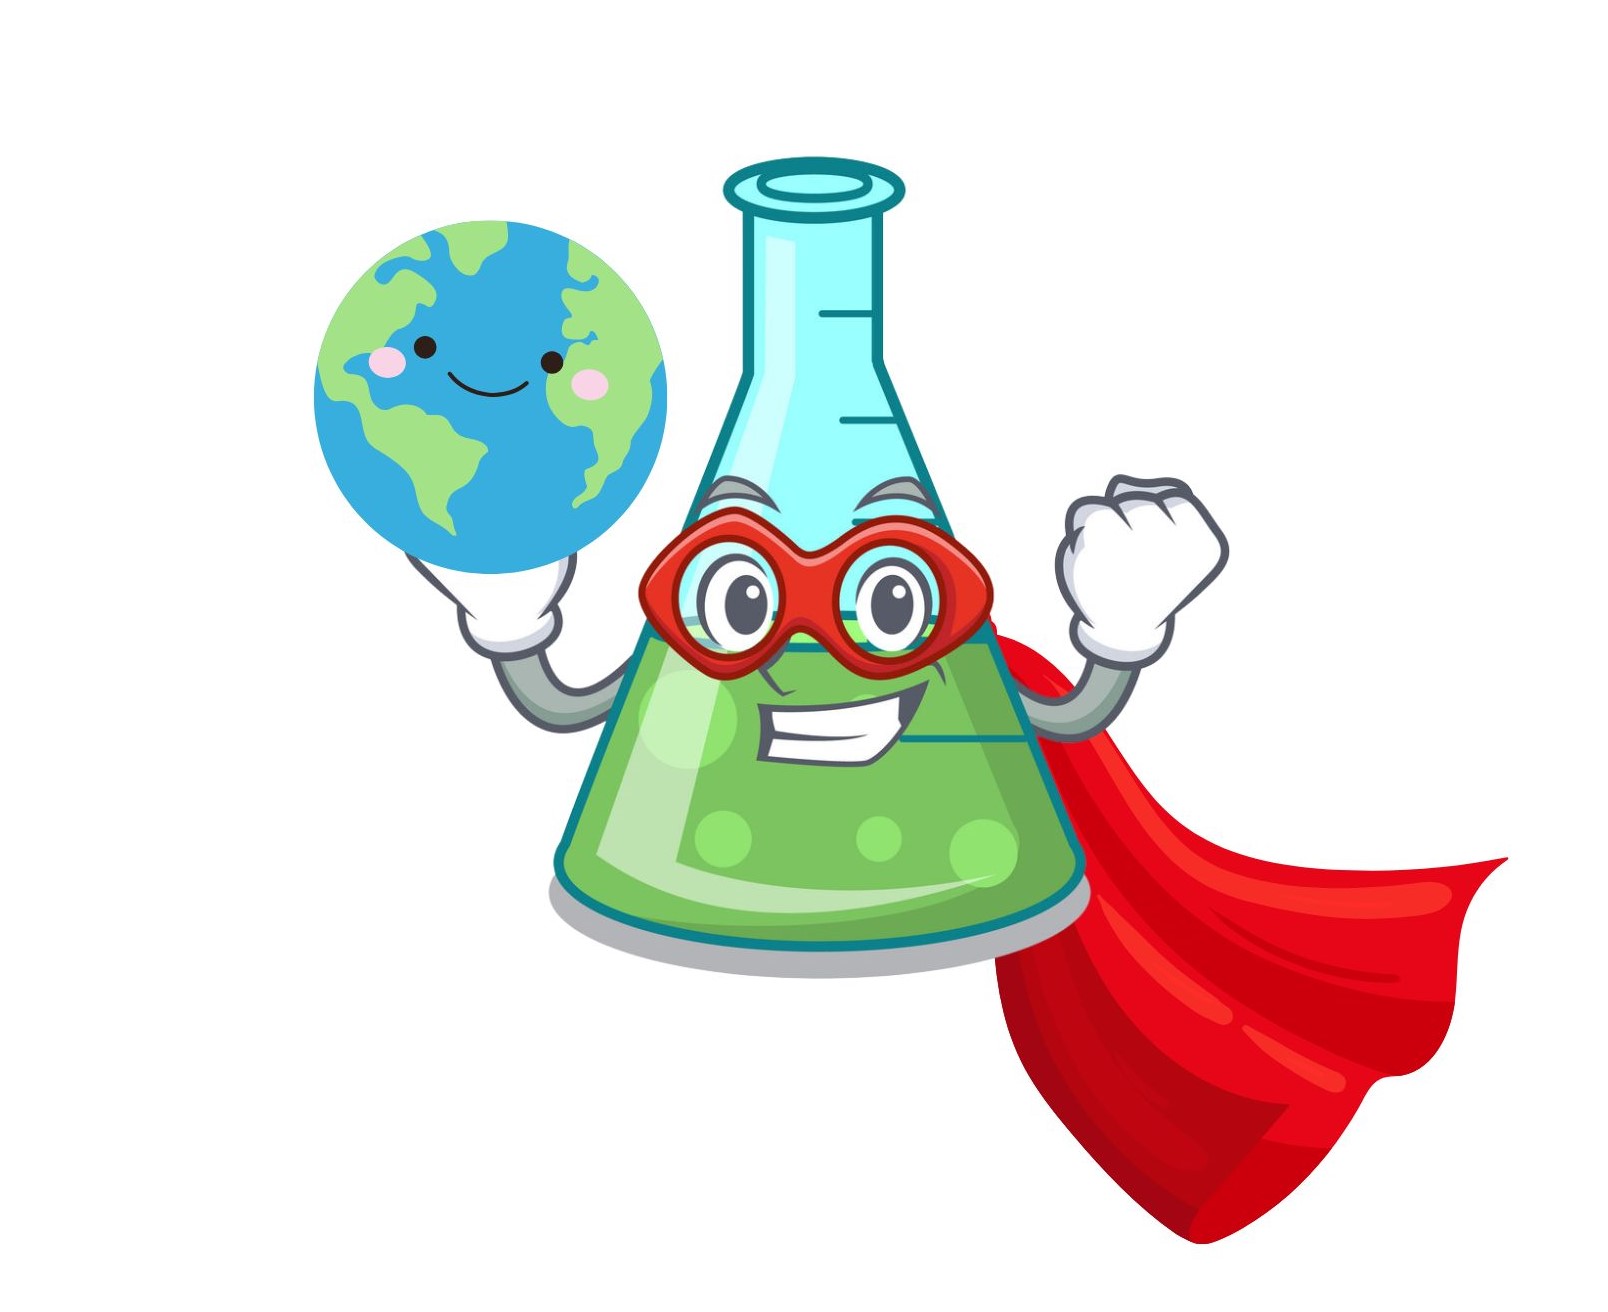 Cartoon beaker with glasses and a cape holding the Earth.